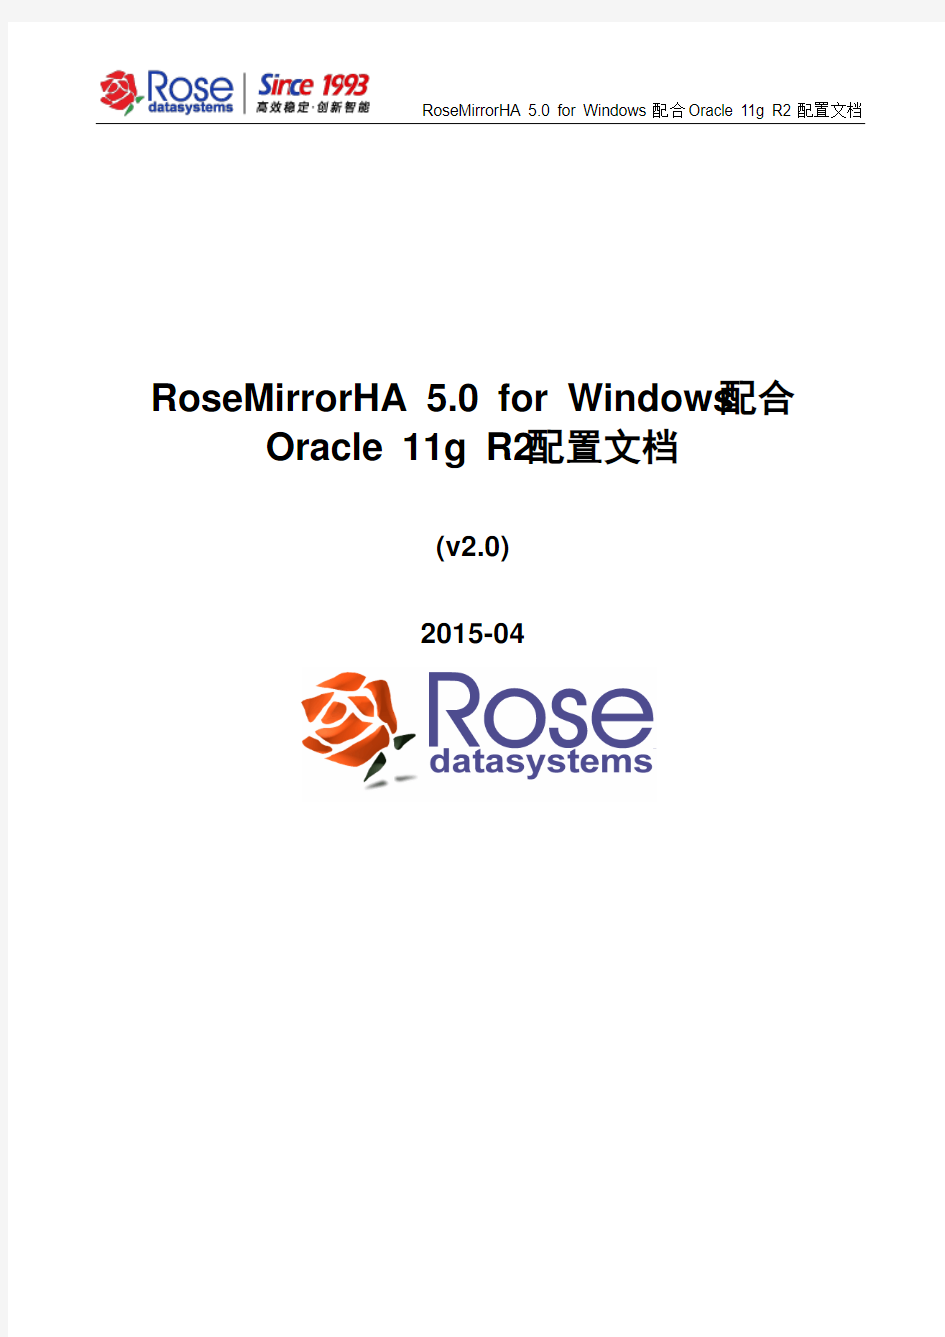 RoseMirrorHA 5.0 for Windows配合Oracle 11g配置文档_v2.0-2015-04-29